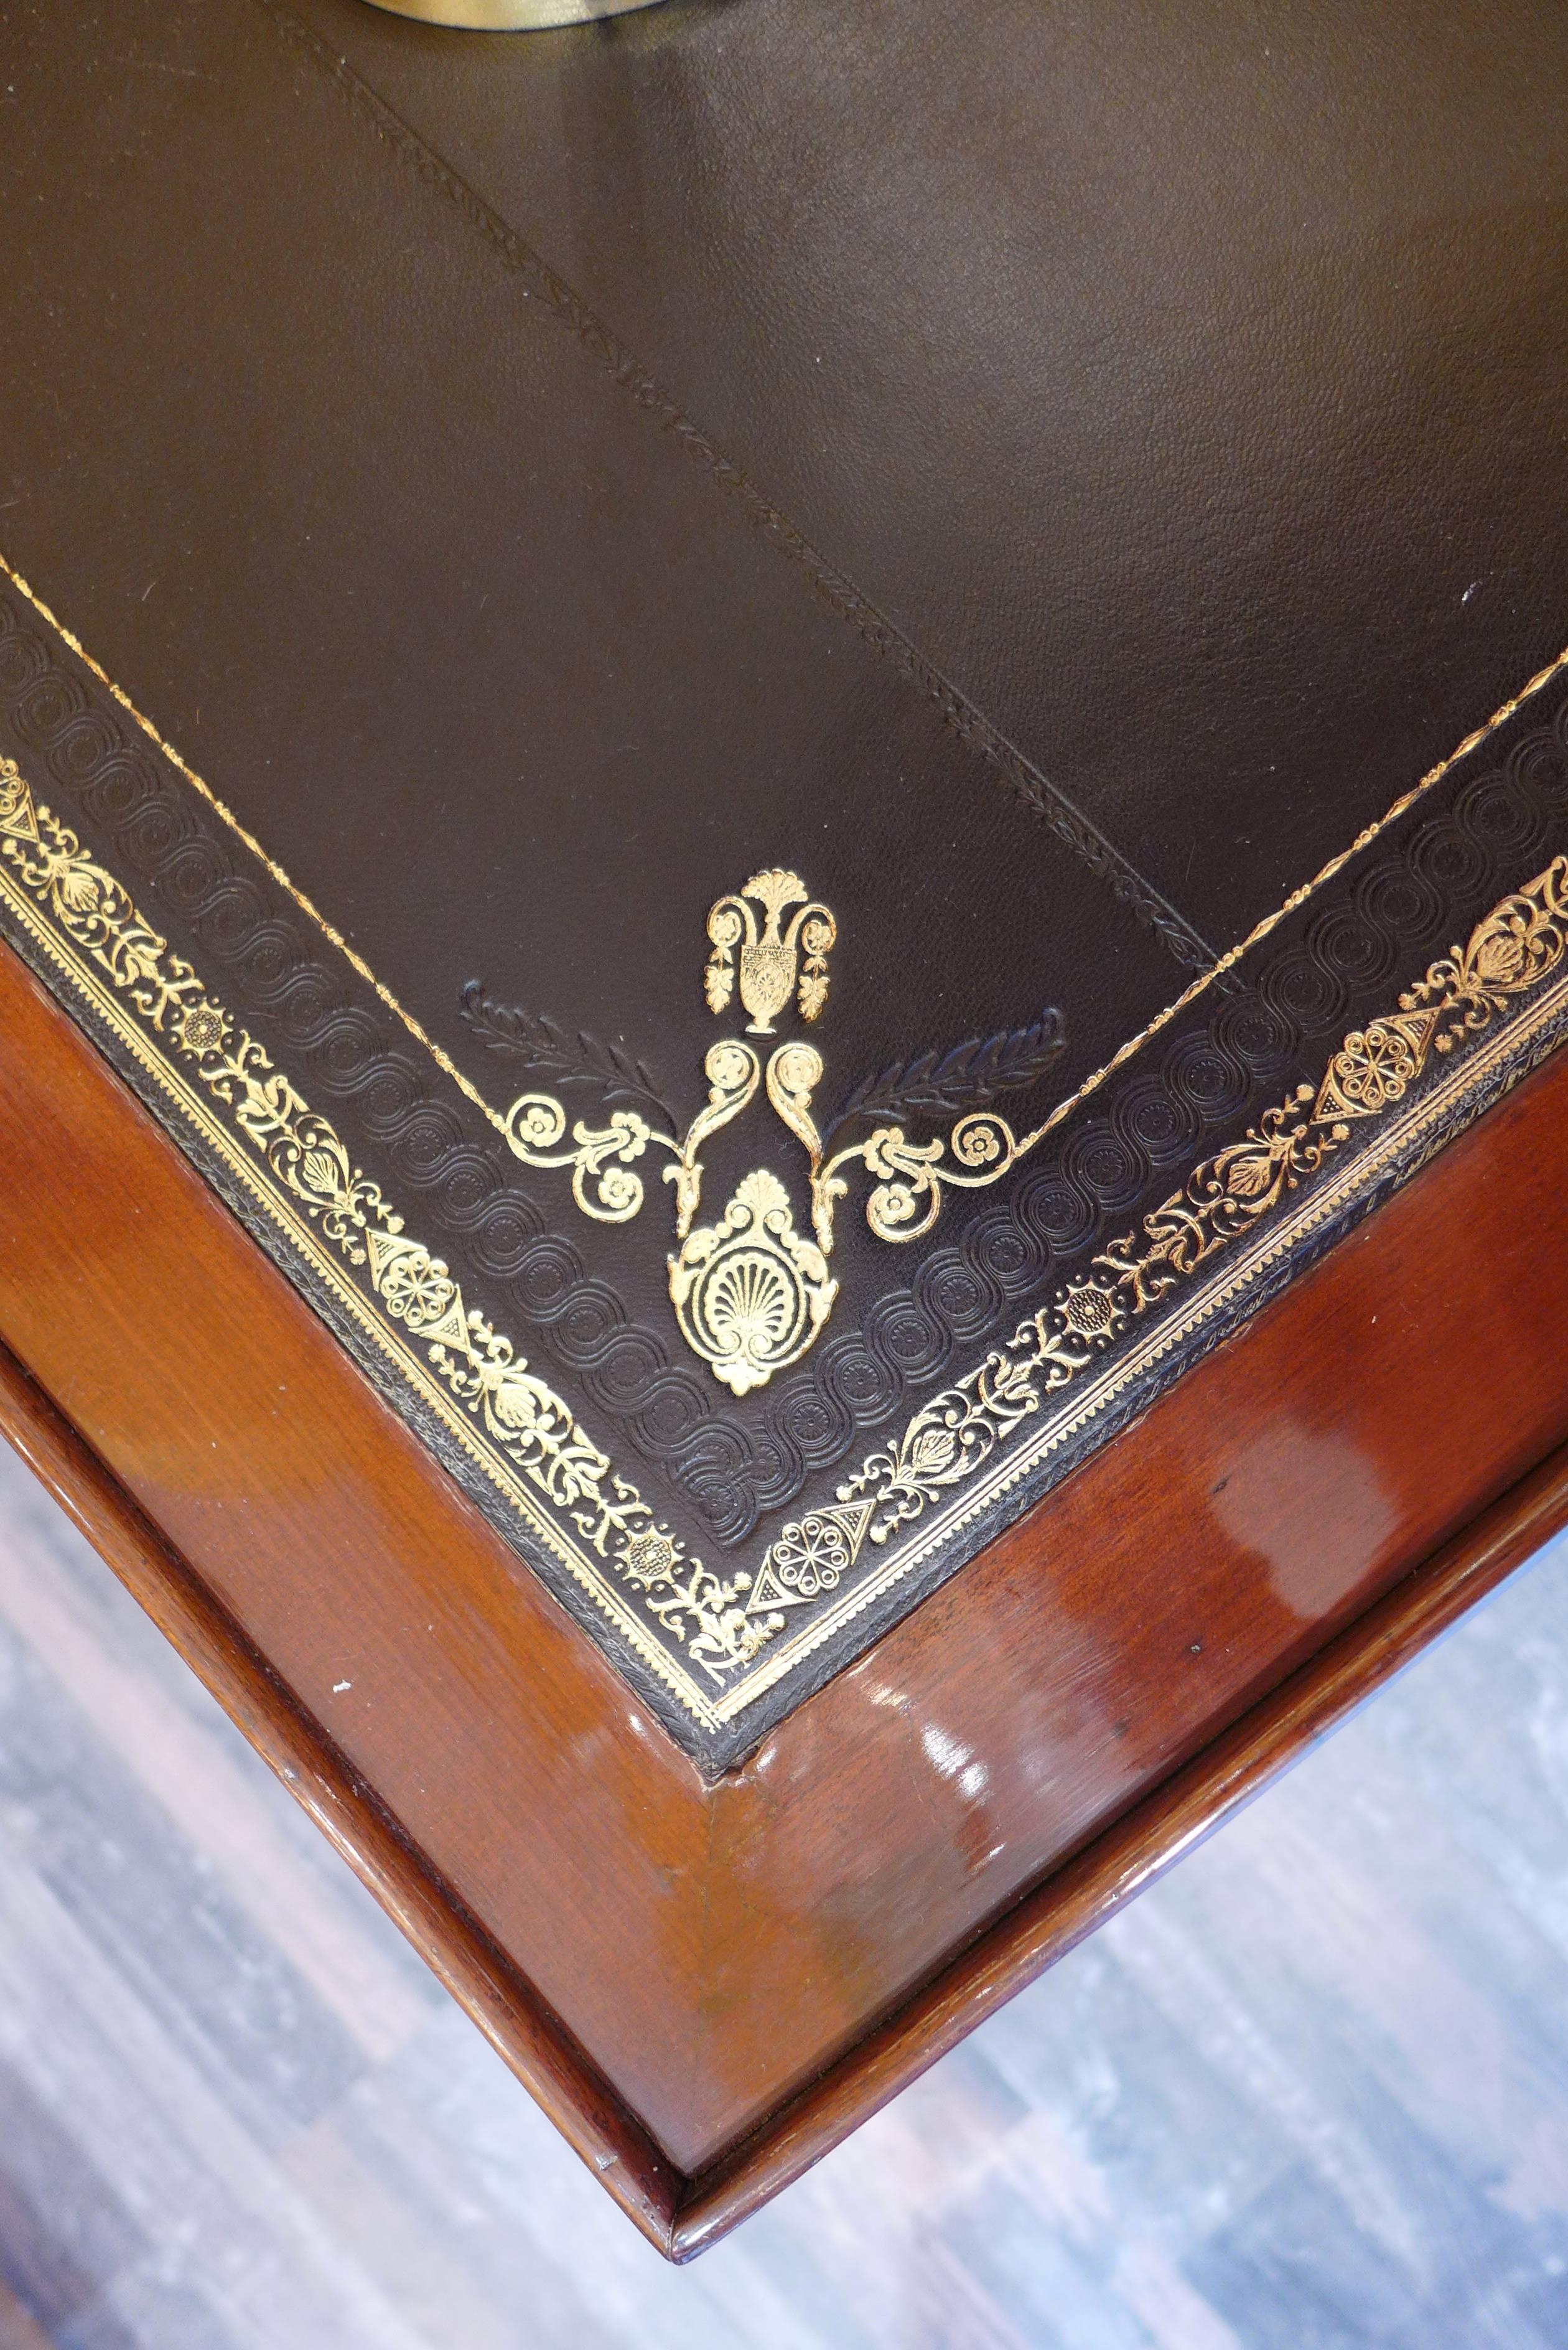 French Directoire Period, circa 1795 Reversible Desk and Tric-Trac Game Table 3